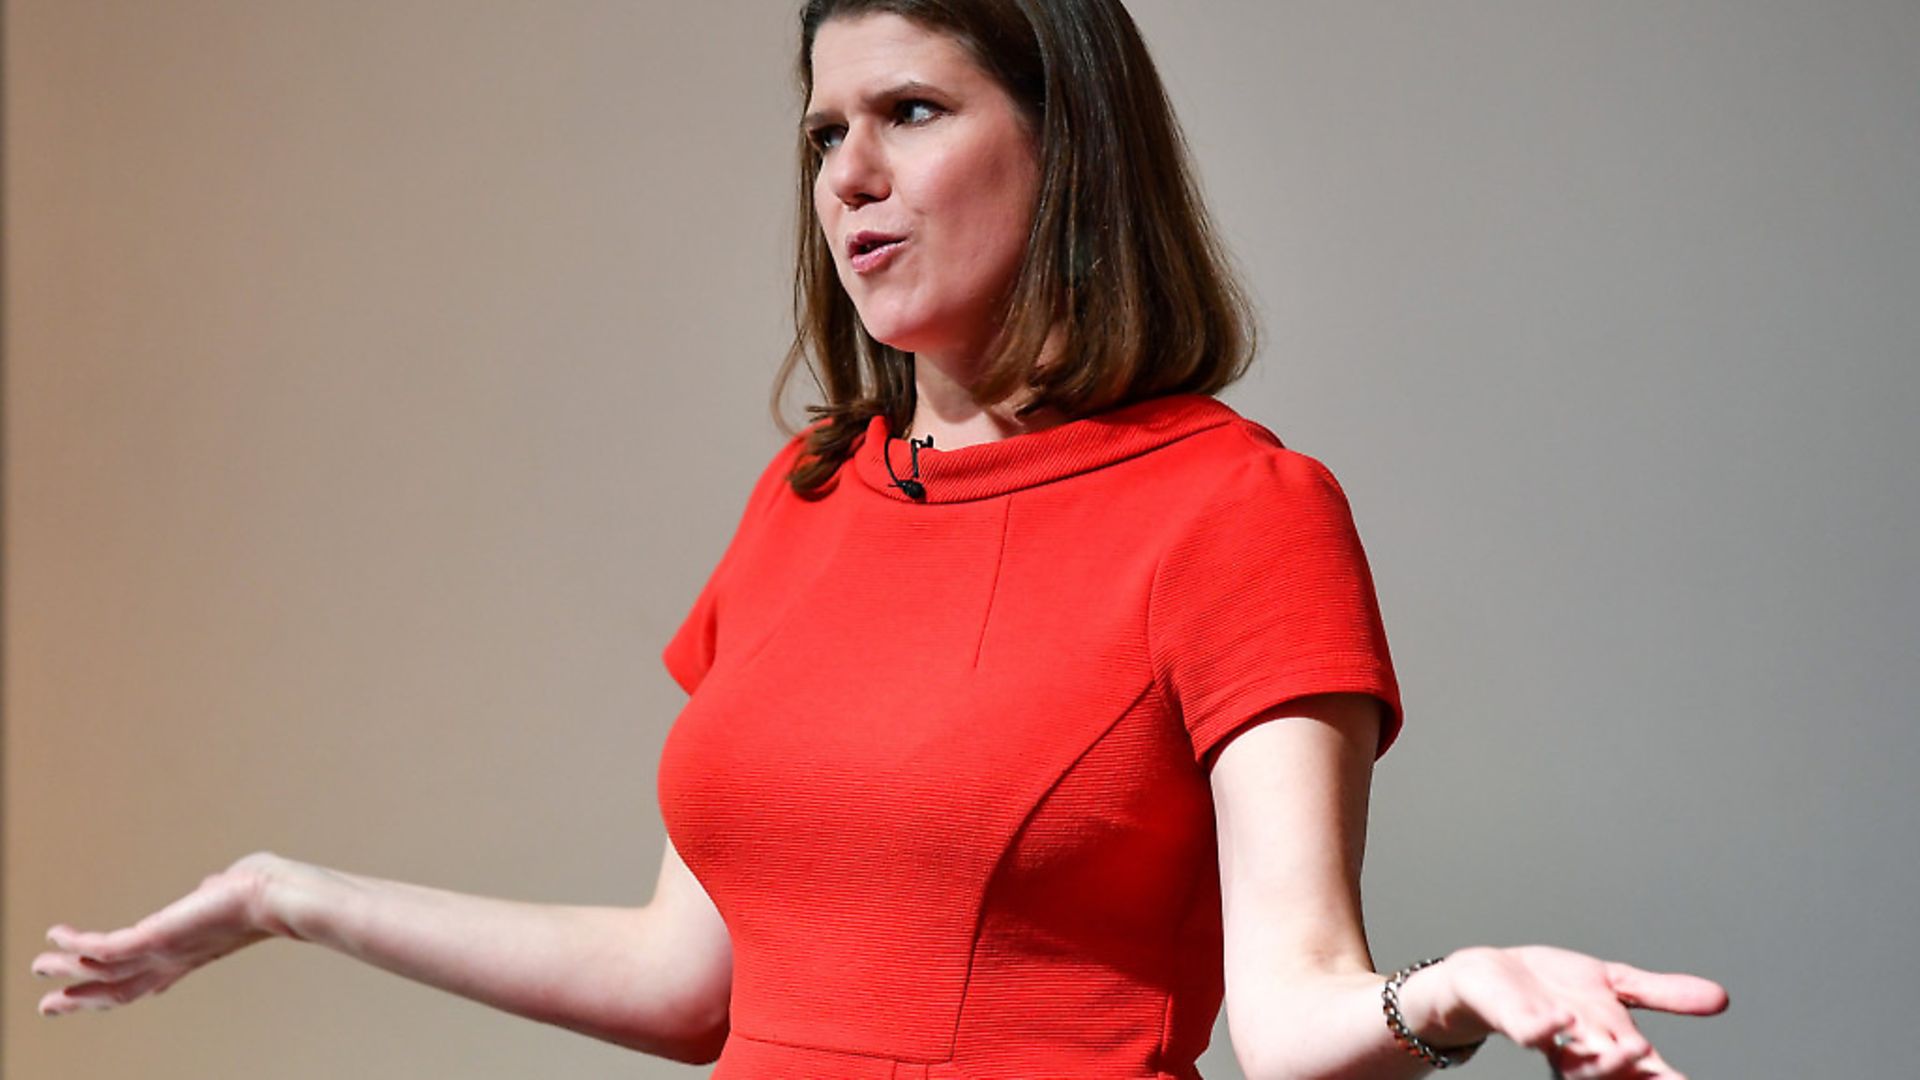 Jo Swinson, leader of the Liberal Democrats. (Photo by Jeff J Mitchell/Getty Images) - Credit: Getty Images